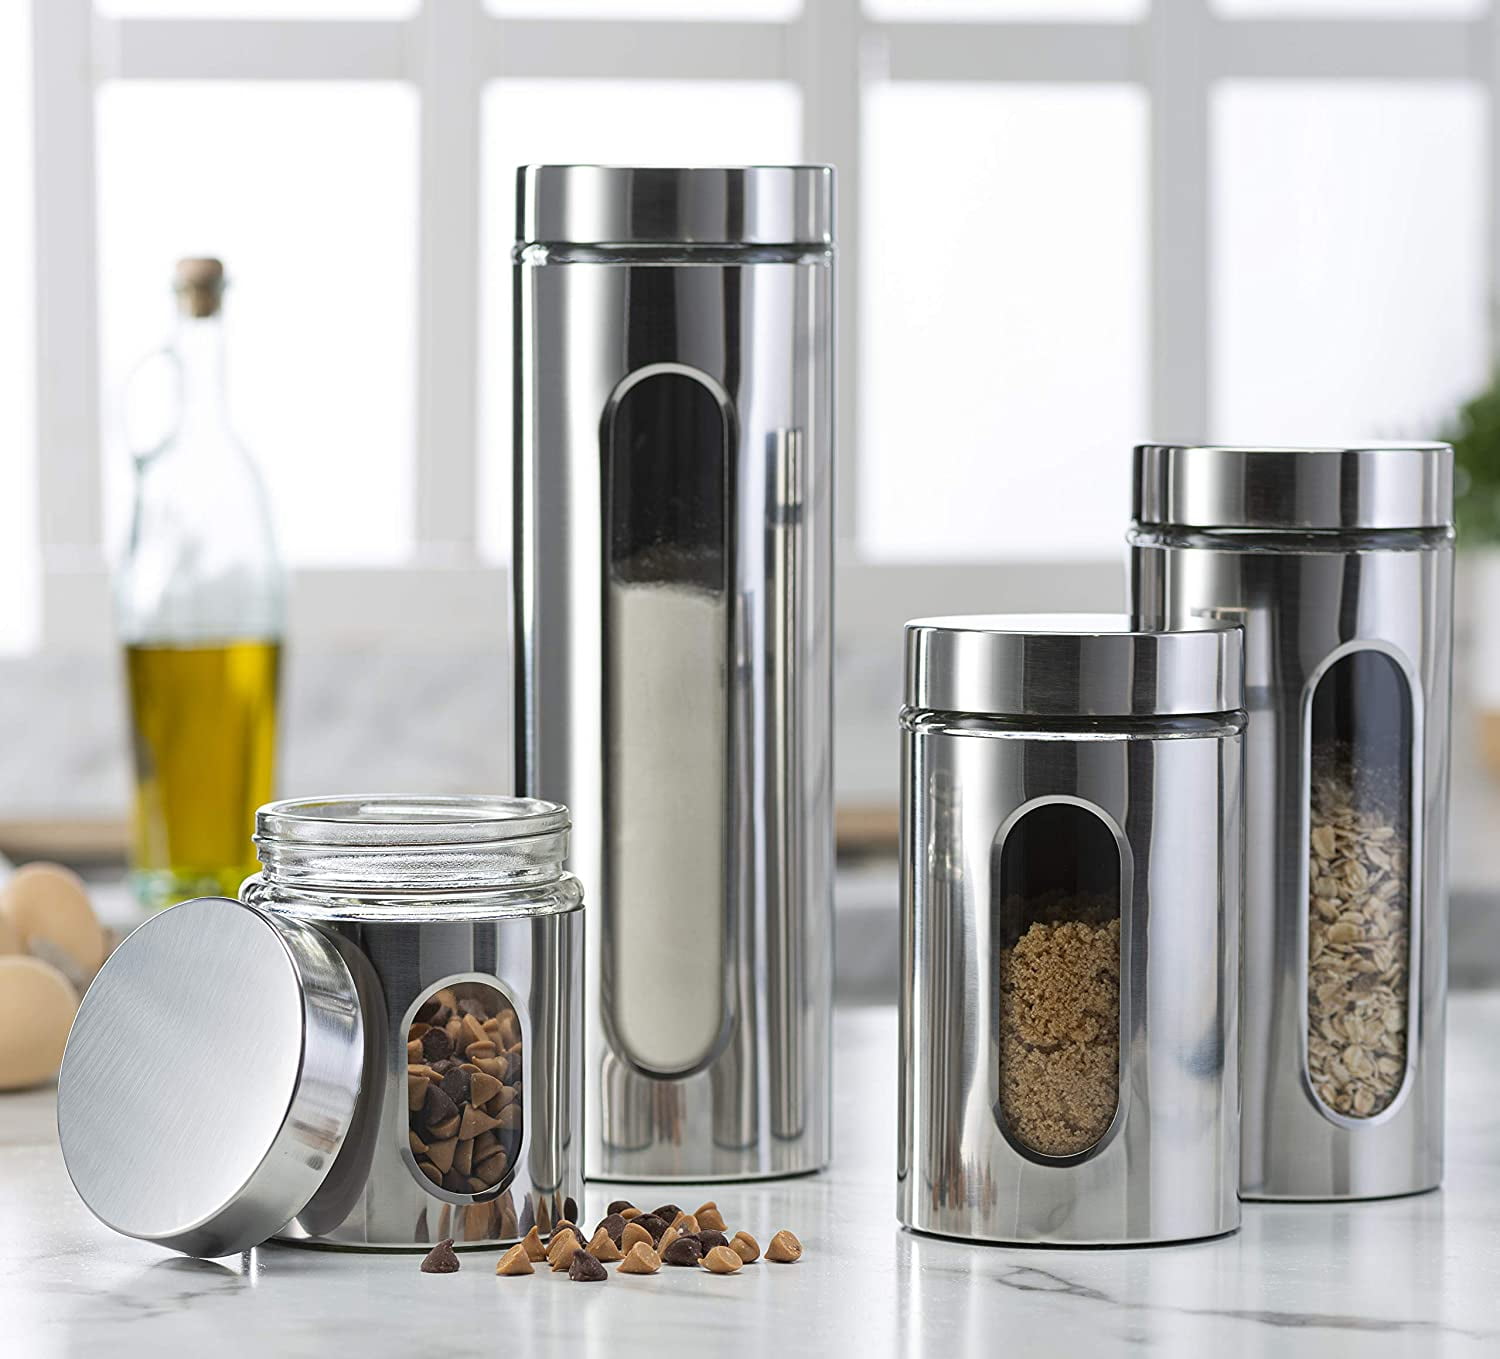  EatNeat Set of 2 Large Glass Food Storage Containers for Pantry  Jars - 4 pc Glass Kitchen Canisters w/Stainless Steel Lids: Home & Kitchen